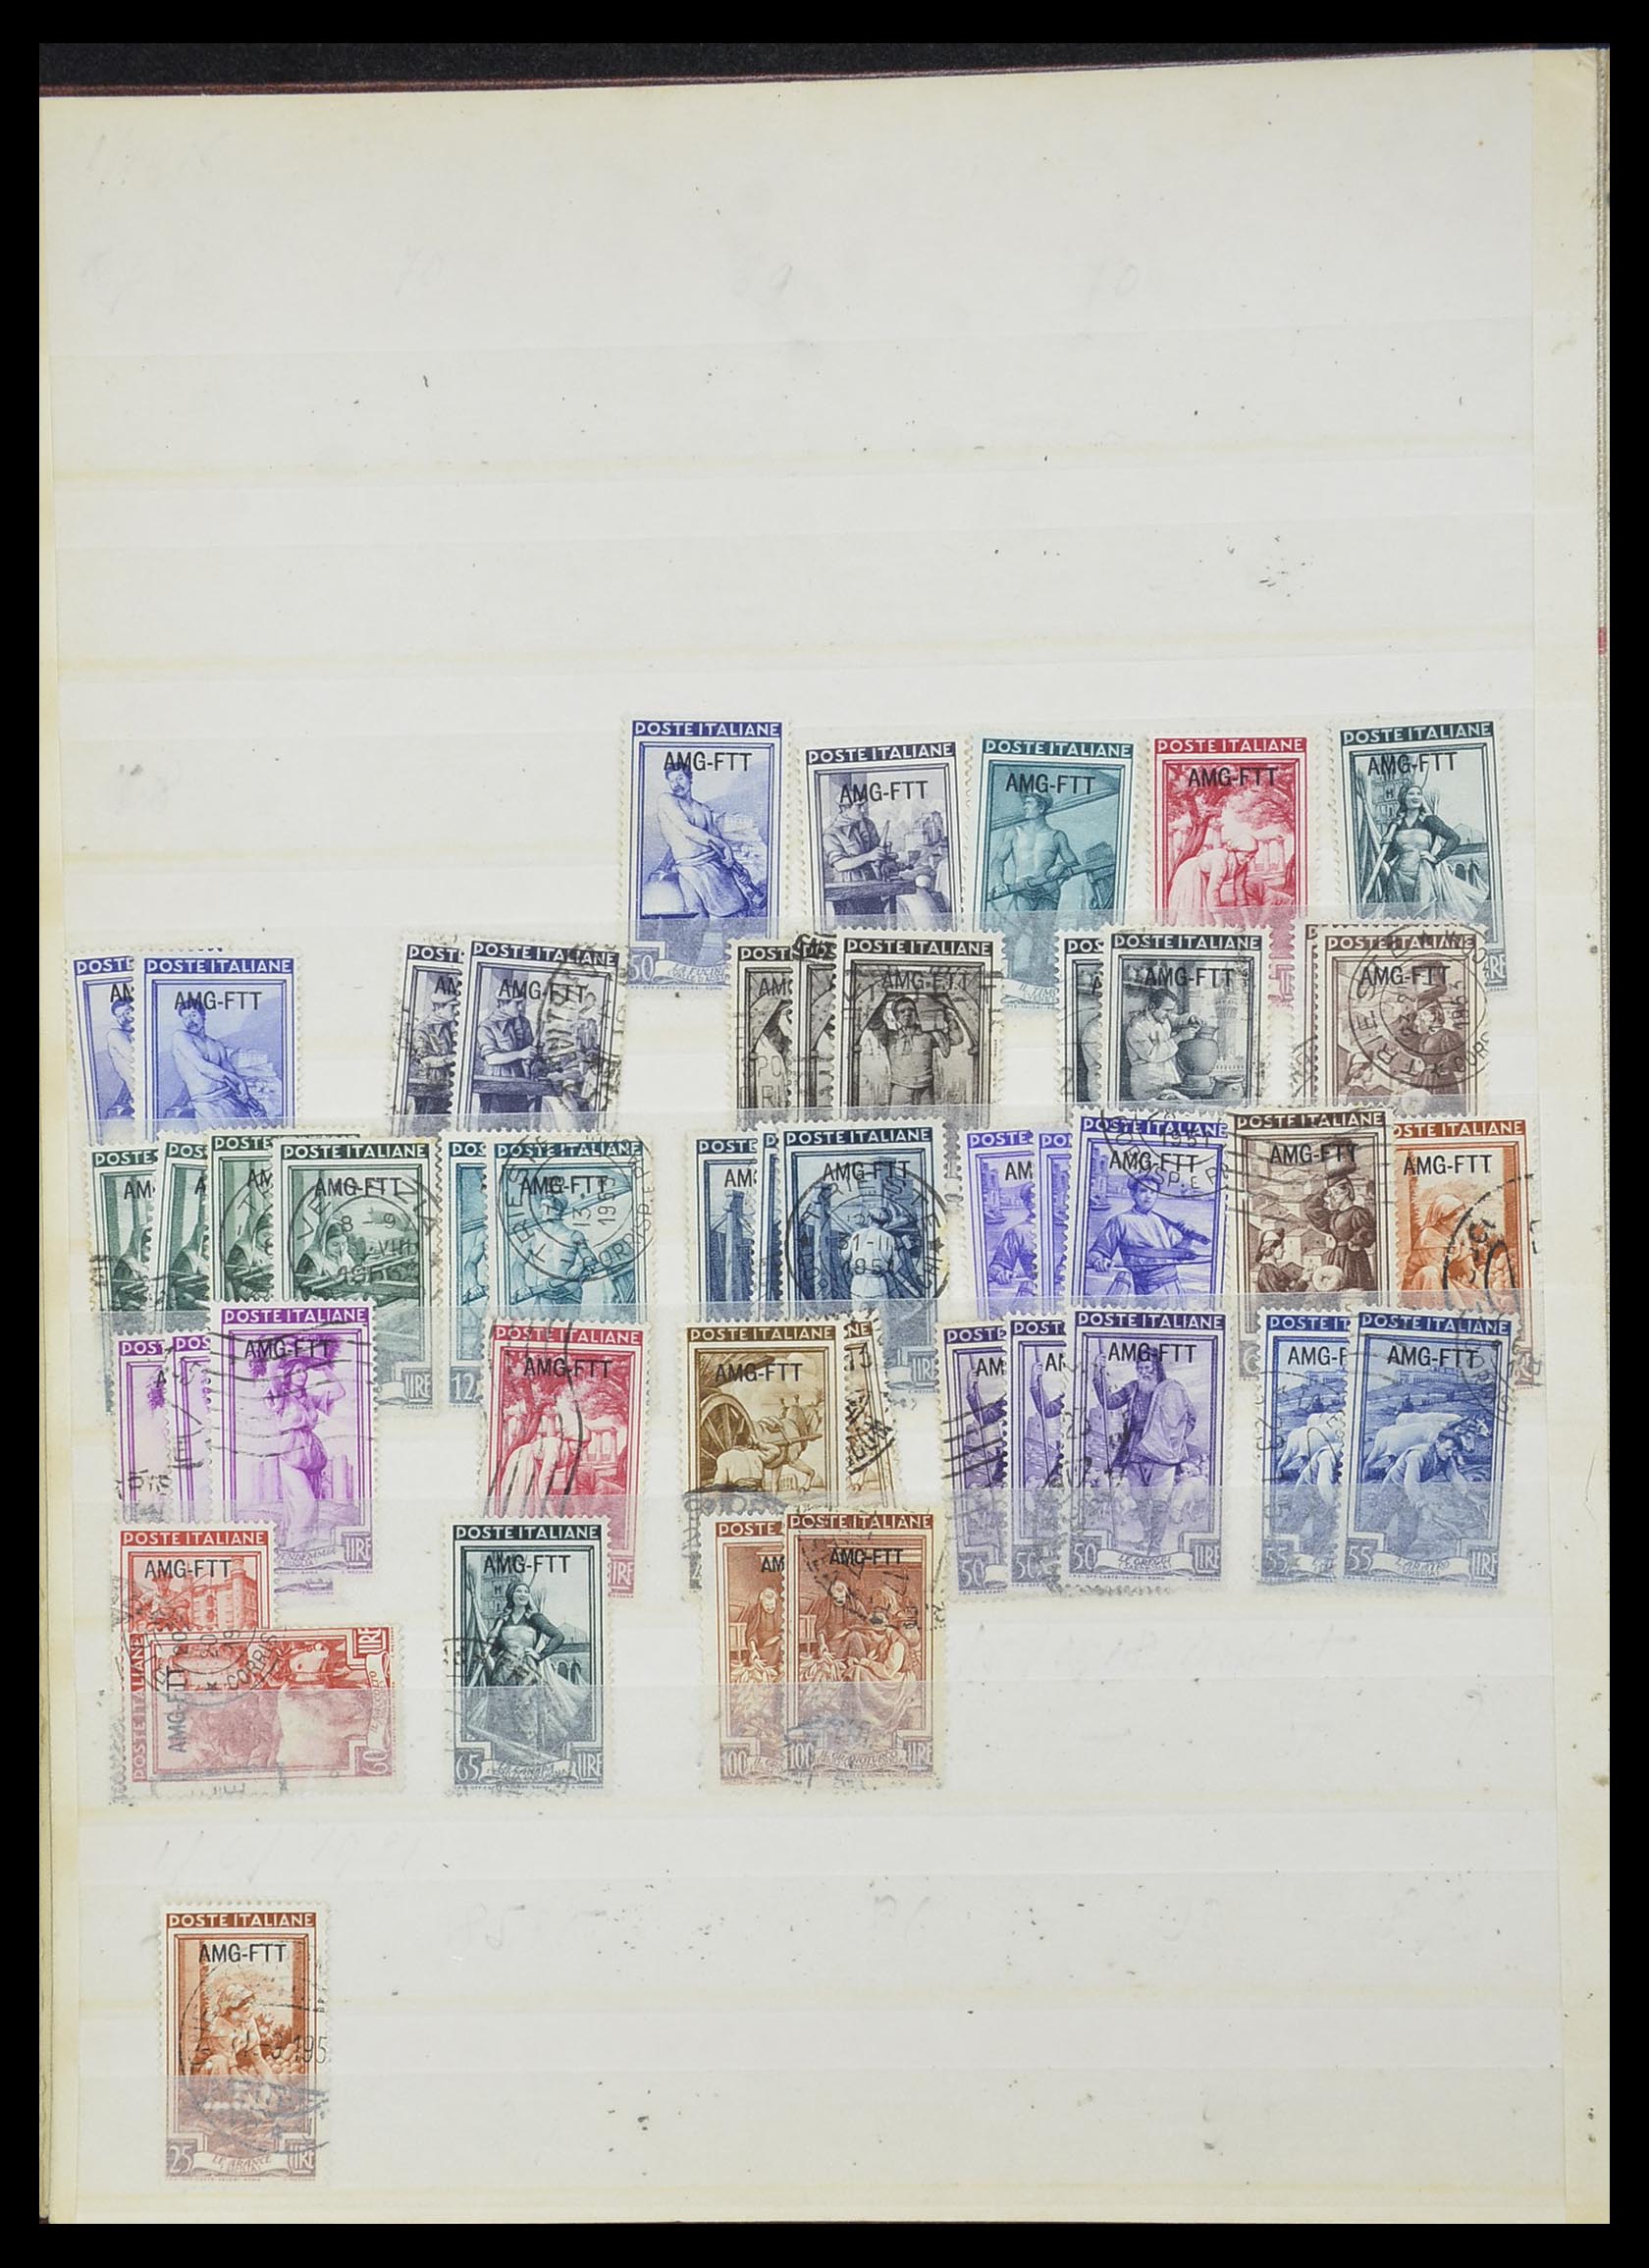 33917 006 - Stamp collection 33917 Triest, Campione and territories 1890-1960.